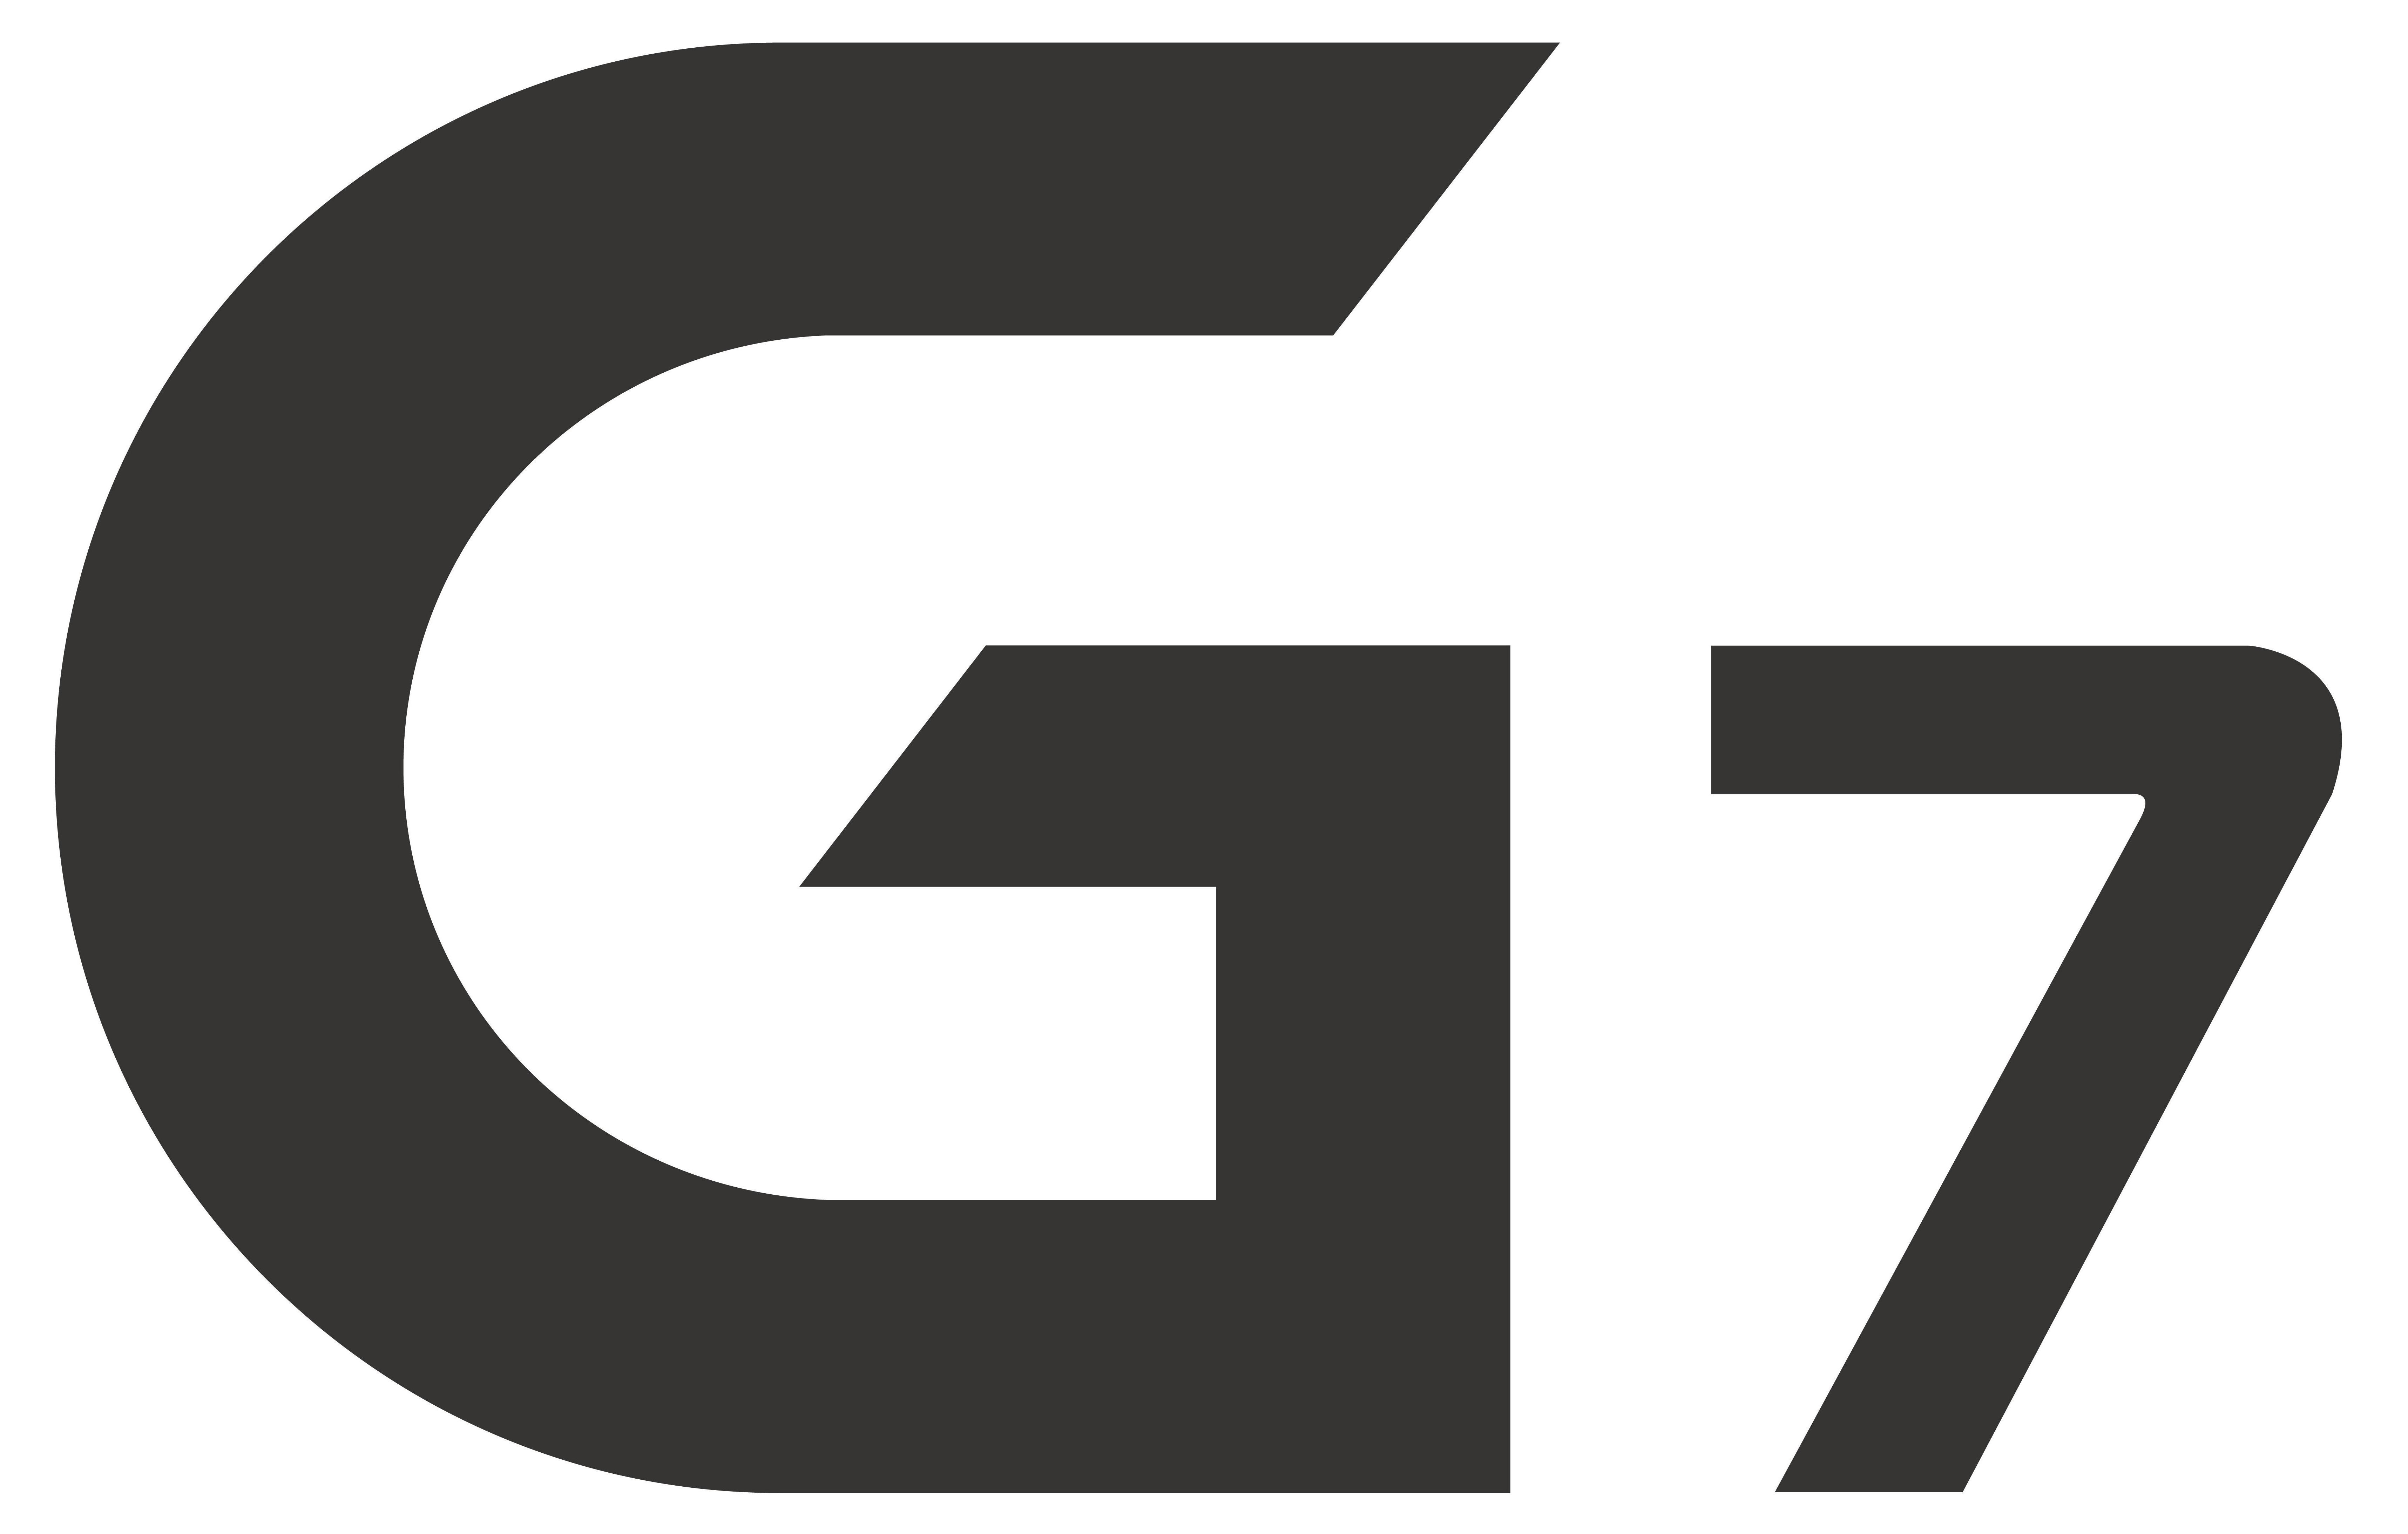 G7 Logo - LG G7 ThinQ phone will be unveiled May 2 - CNET